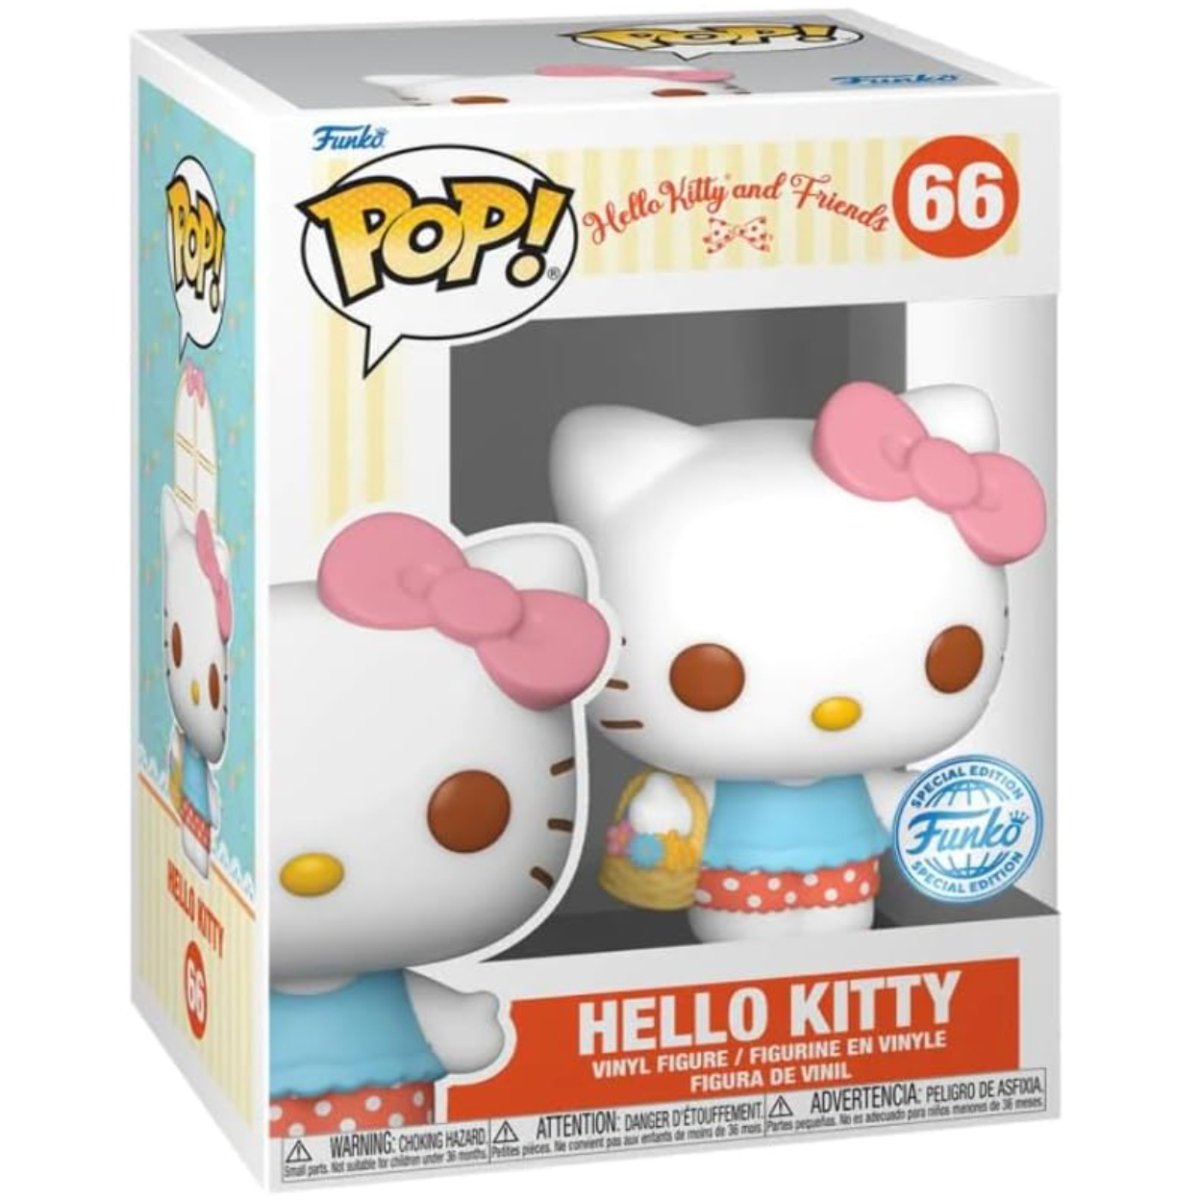 Sanrio - Hello Kitty and Friends - Hello Kitty [with Basket] (Special Edition) #66 - Funko Pop! Vinyl Anime - Persona Toys